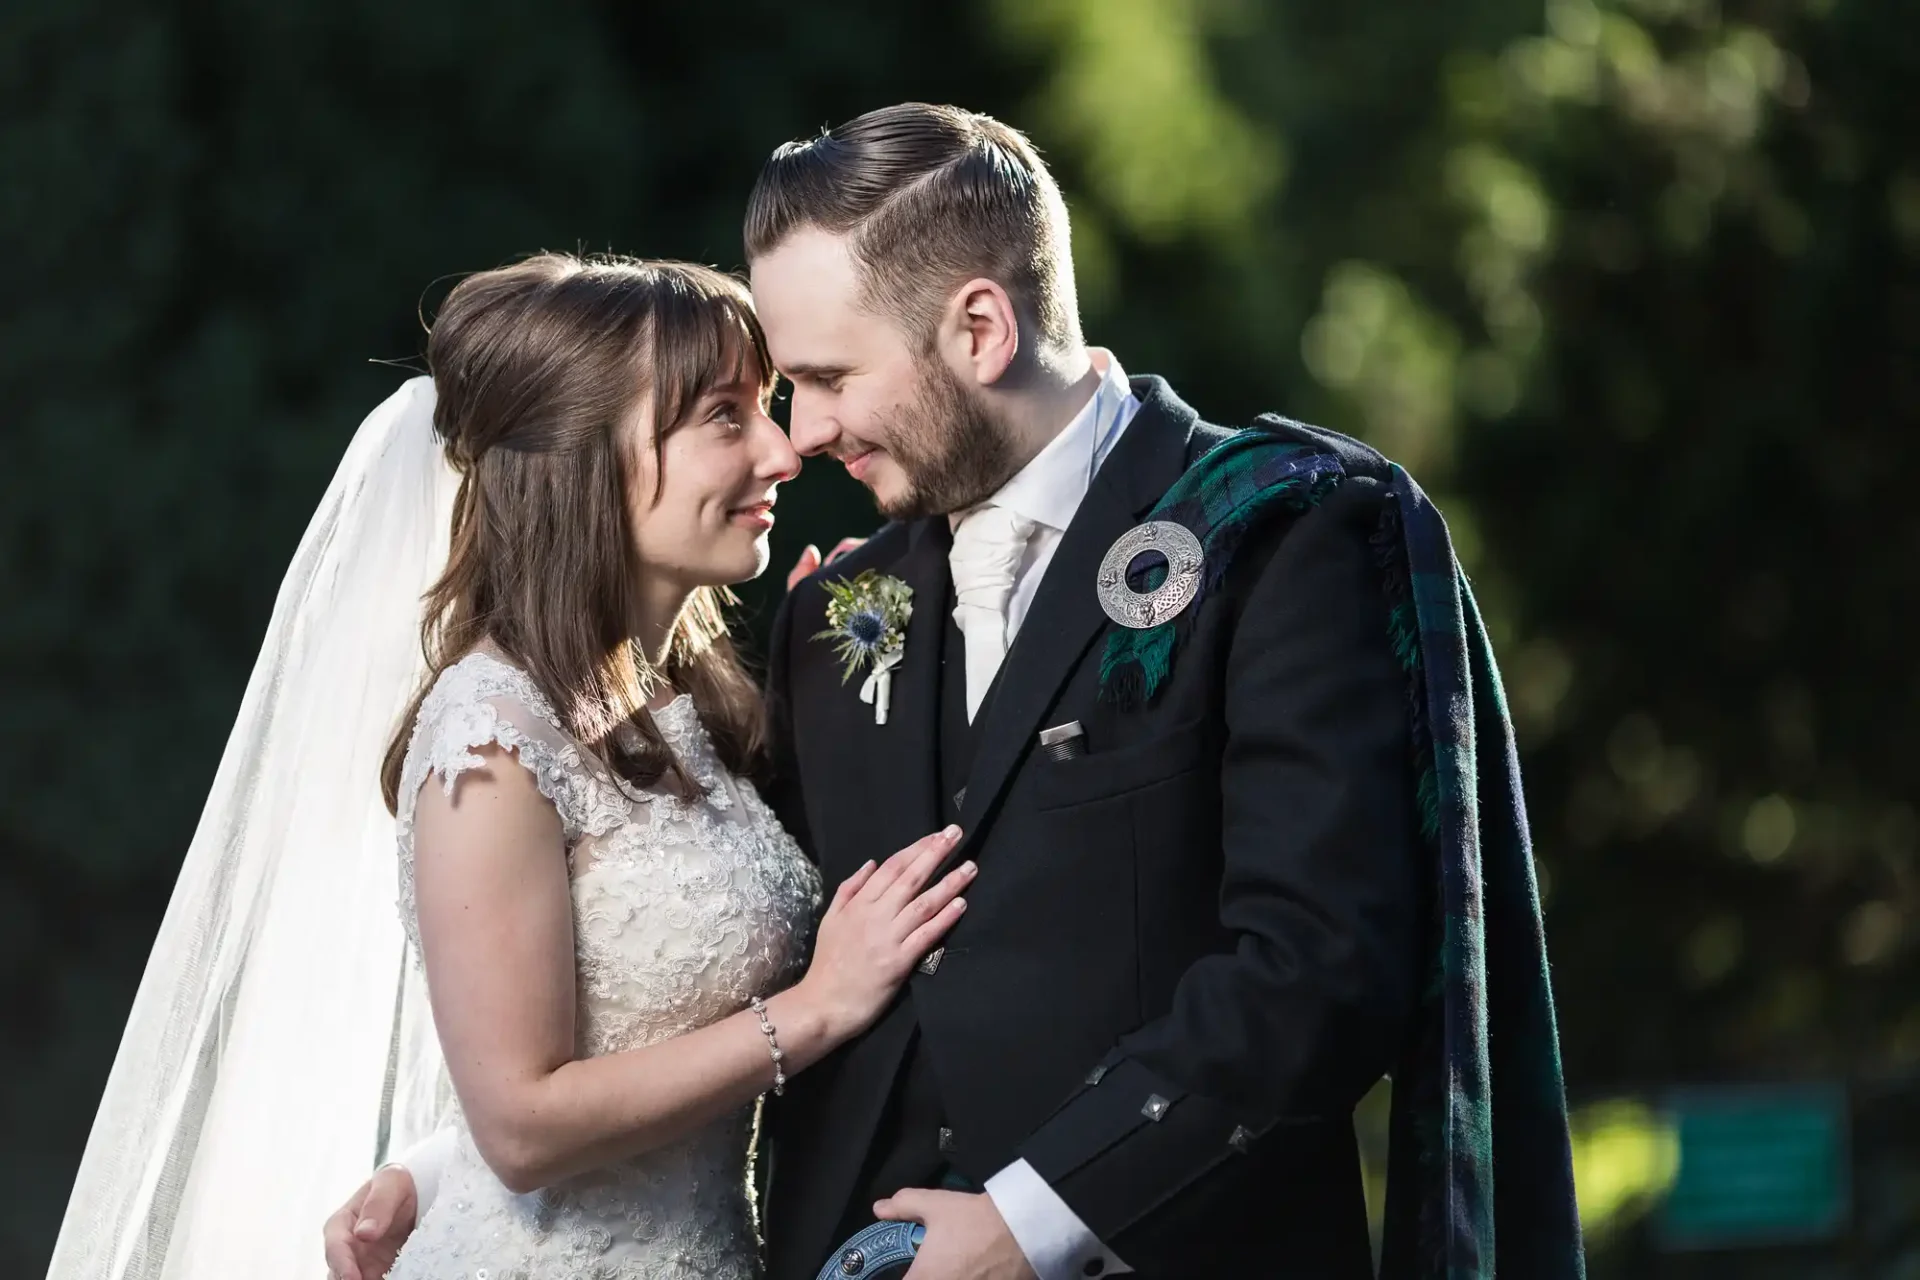 A bride and groom smiling at each other affectionately in a sunlit garden, dressed in wedding attire.